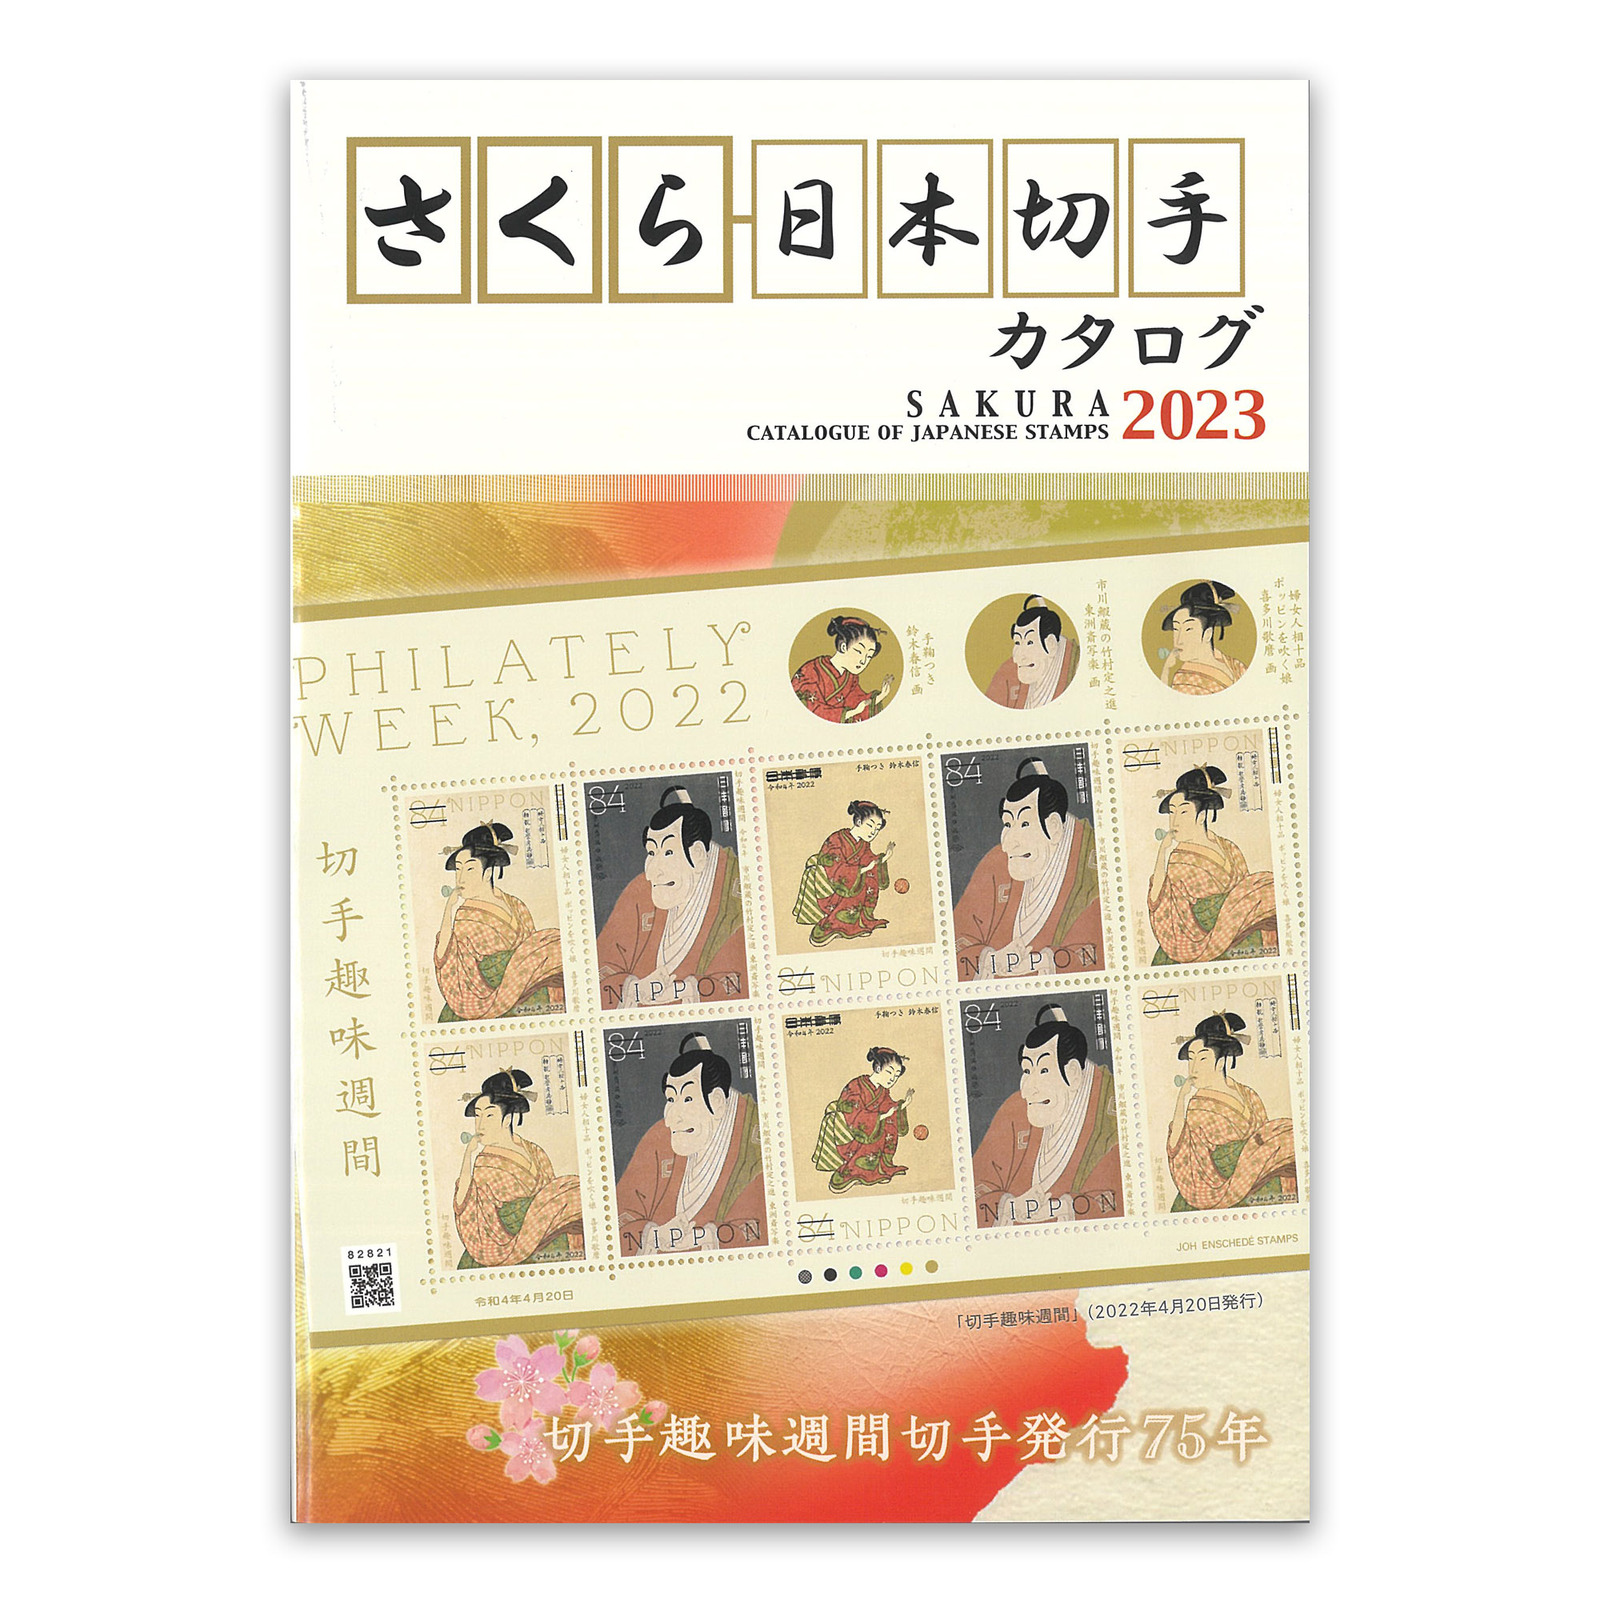 Japan 2023 Sakura Stamps Catalogue Latest Edition In Full Colour Pages